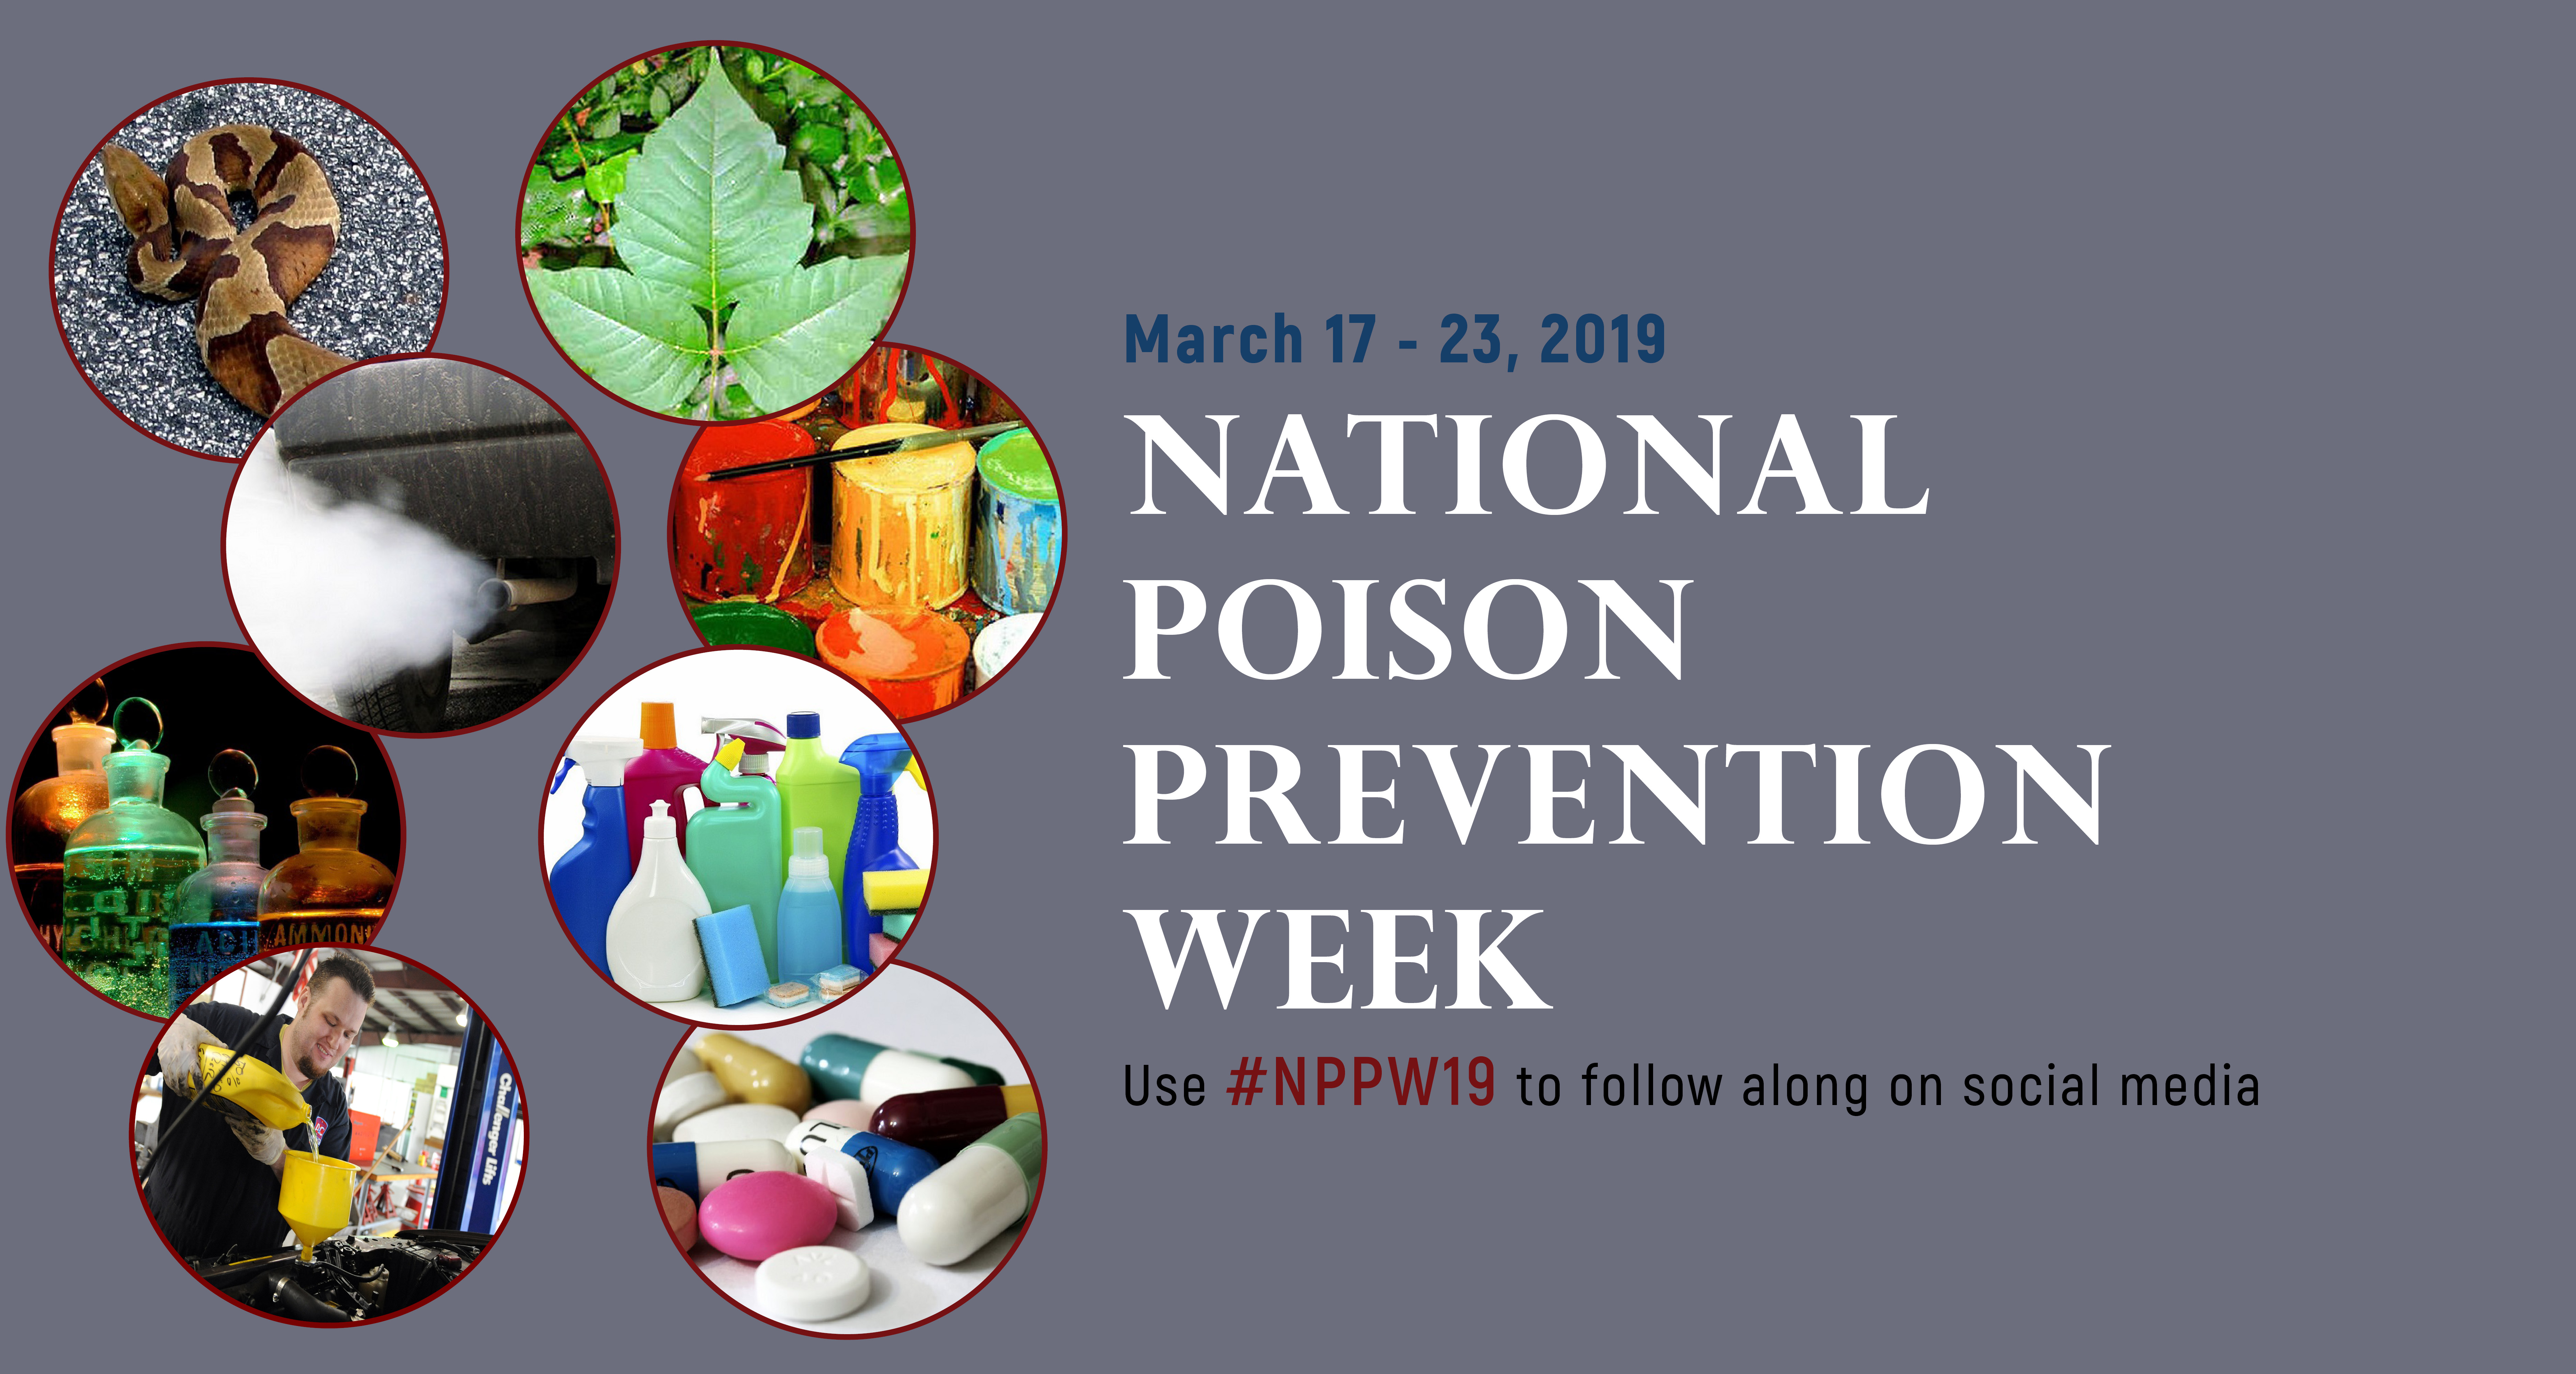 Collage of common household poison hazards set against blue-gray background with National Poison Prevention Week dates beside it.